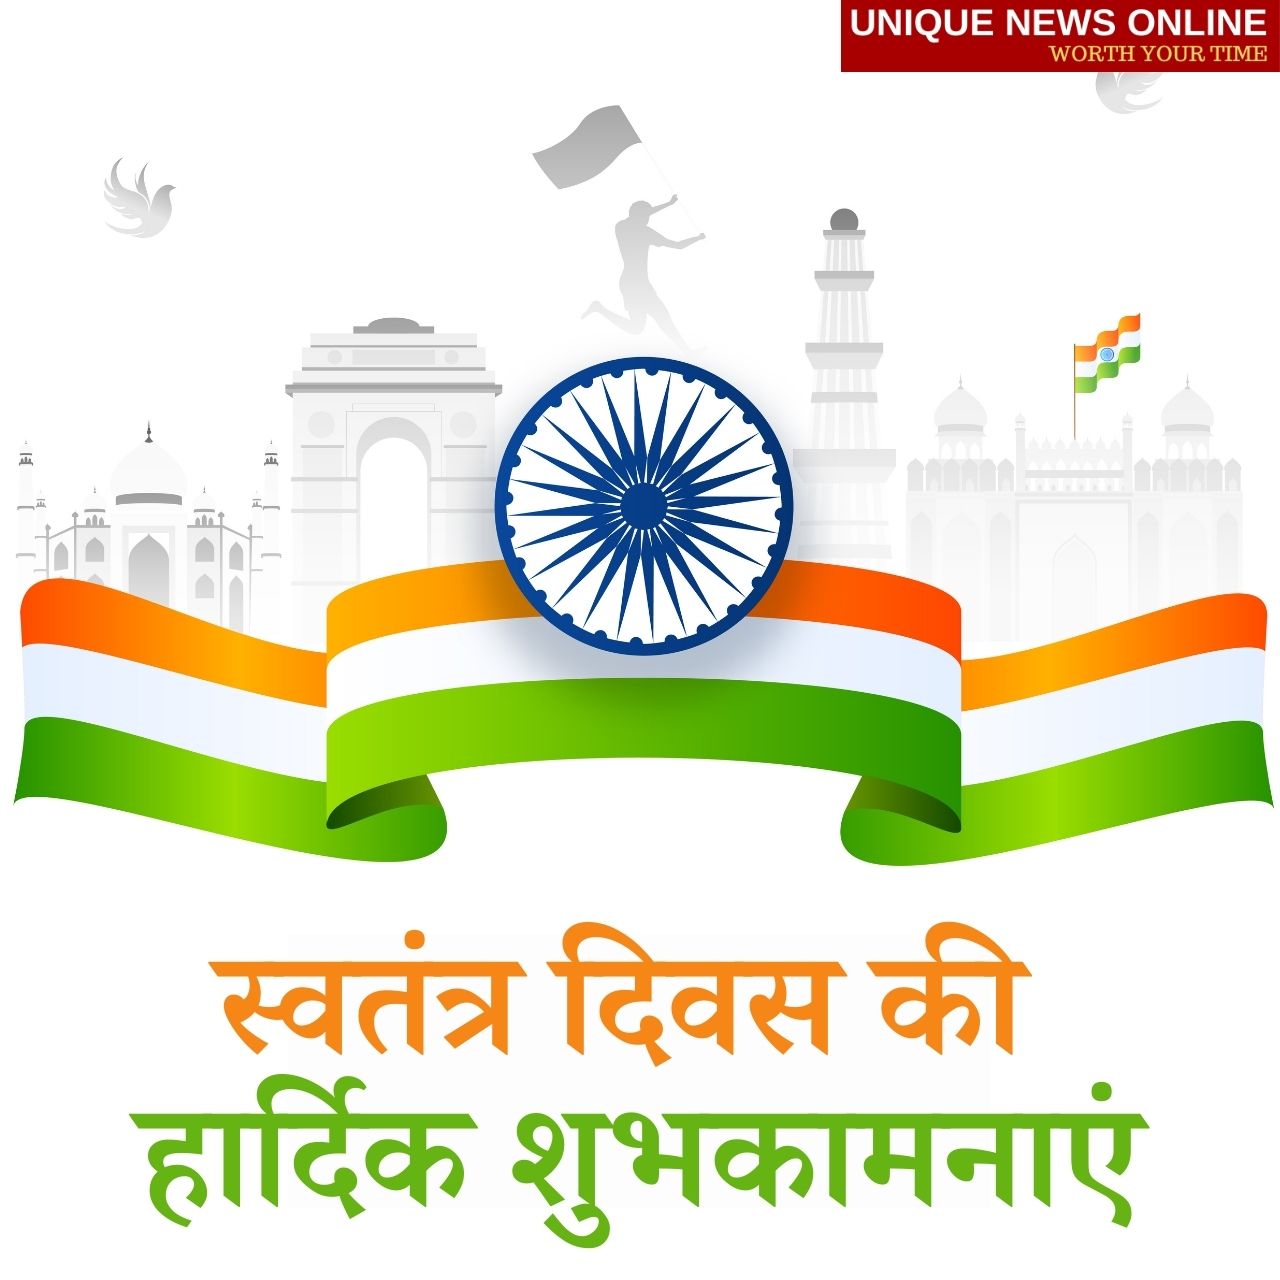 Swatantrata Diwas 2021: Hindi Wishes, Shayari, Slogans, HD Images, Quotes, Status, Greetings, Quotes, DP, Poster, and Banner for Indian Independence Day